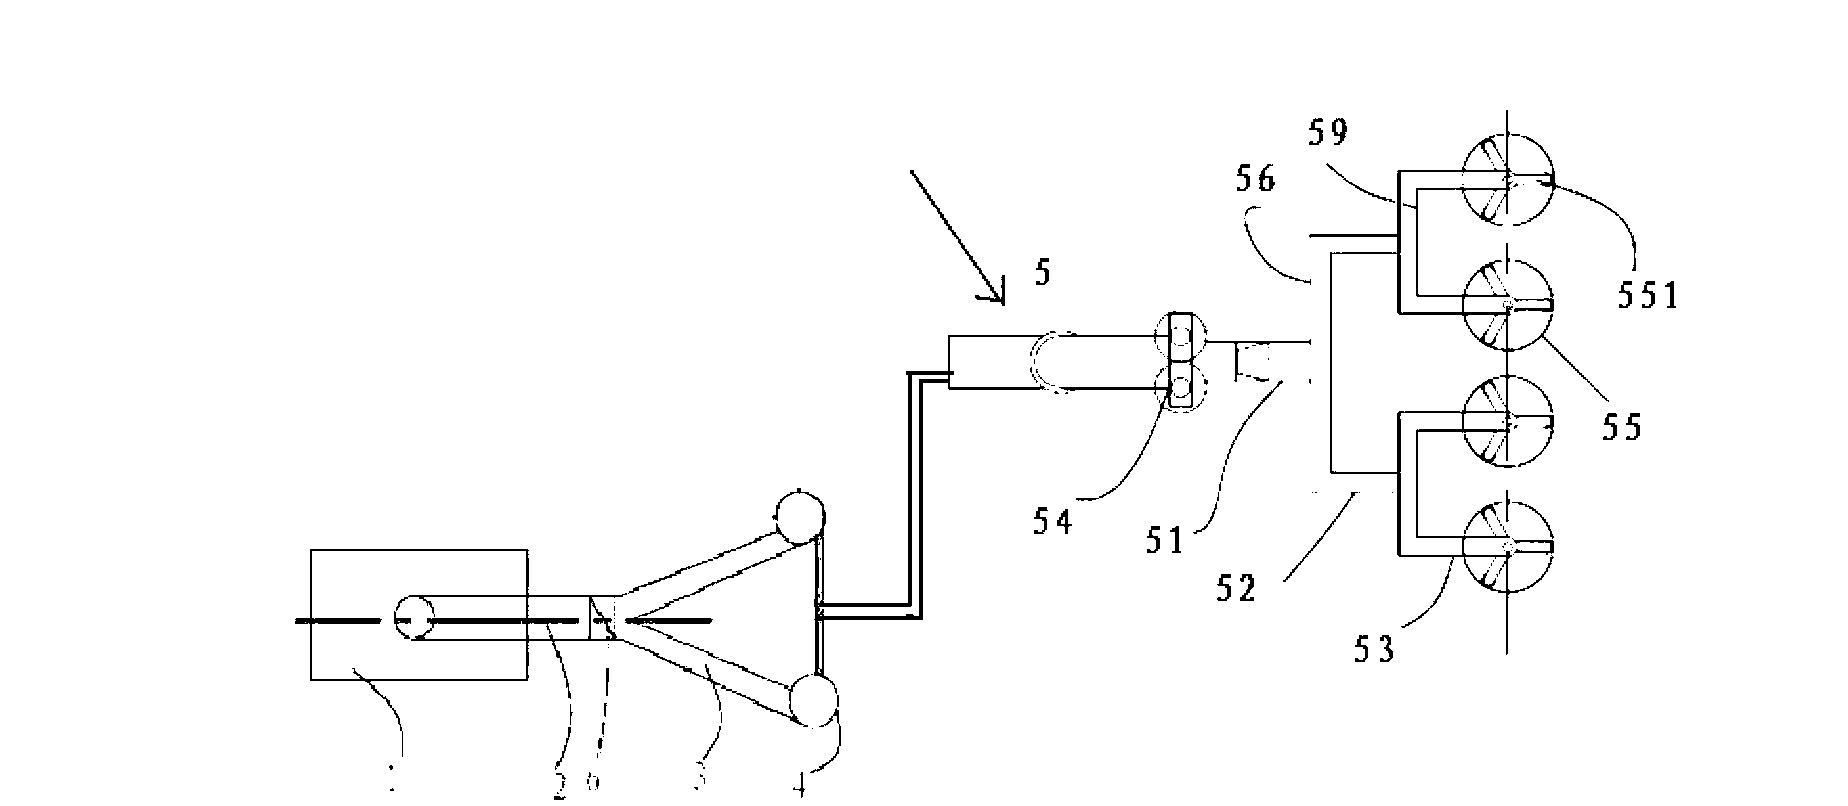 Pulverizing split-flow collecting device